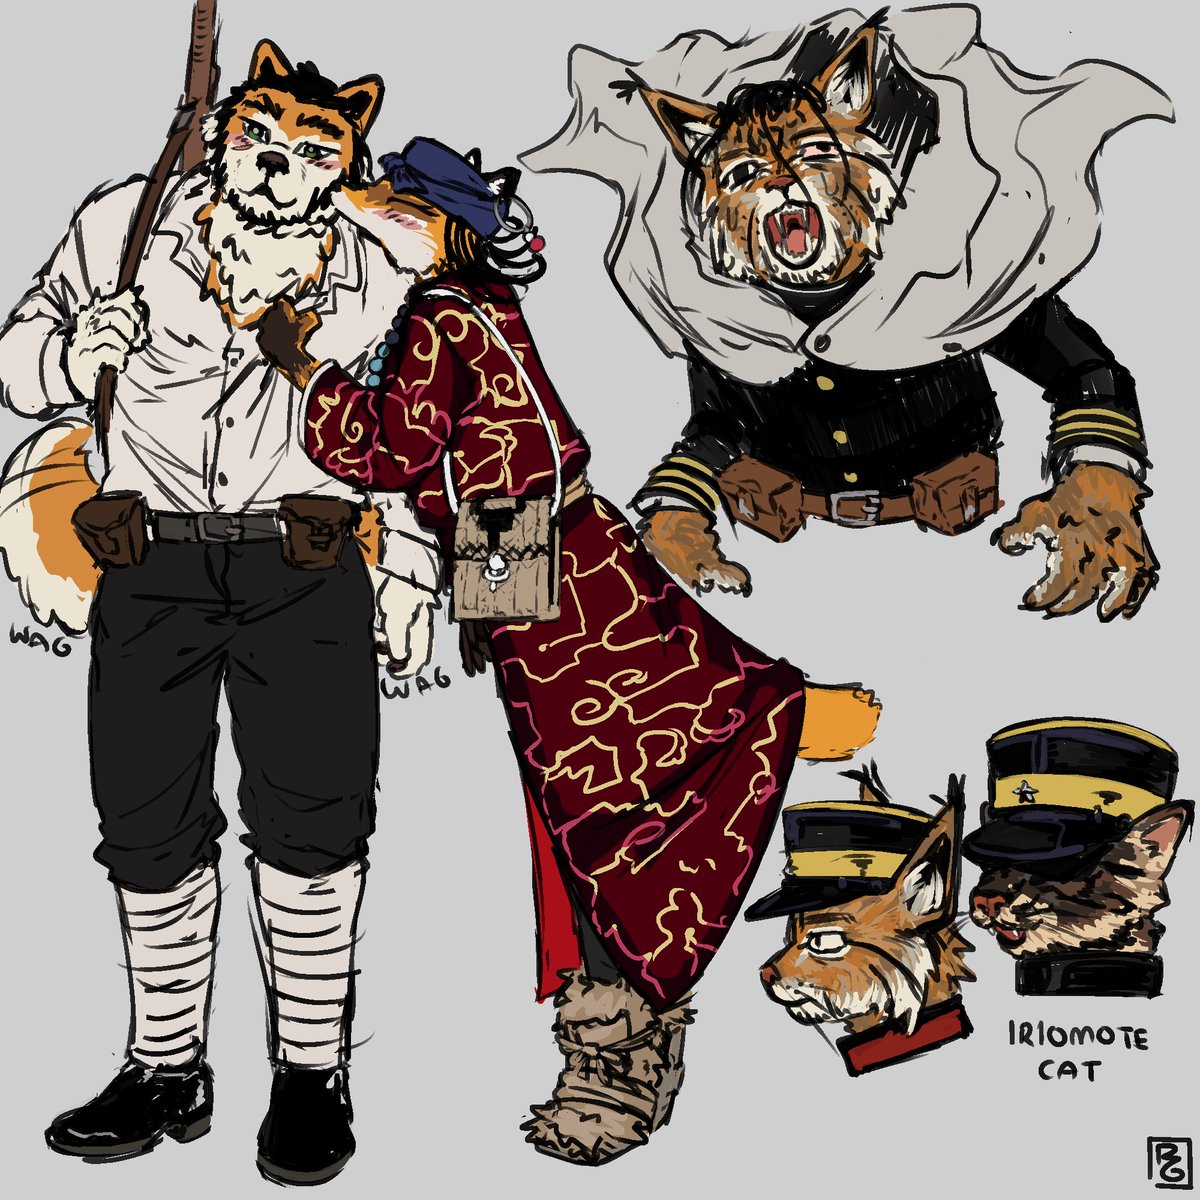 feels like forever since i've drawn furries, so i drew some golden kamuy ones for fun